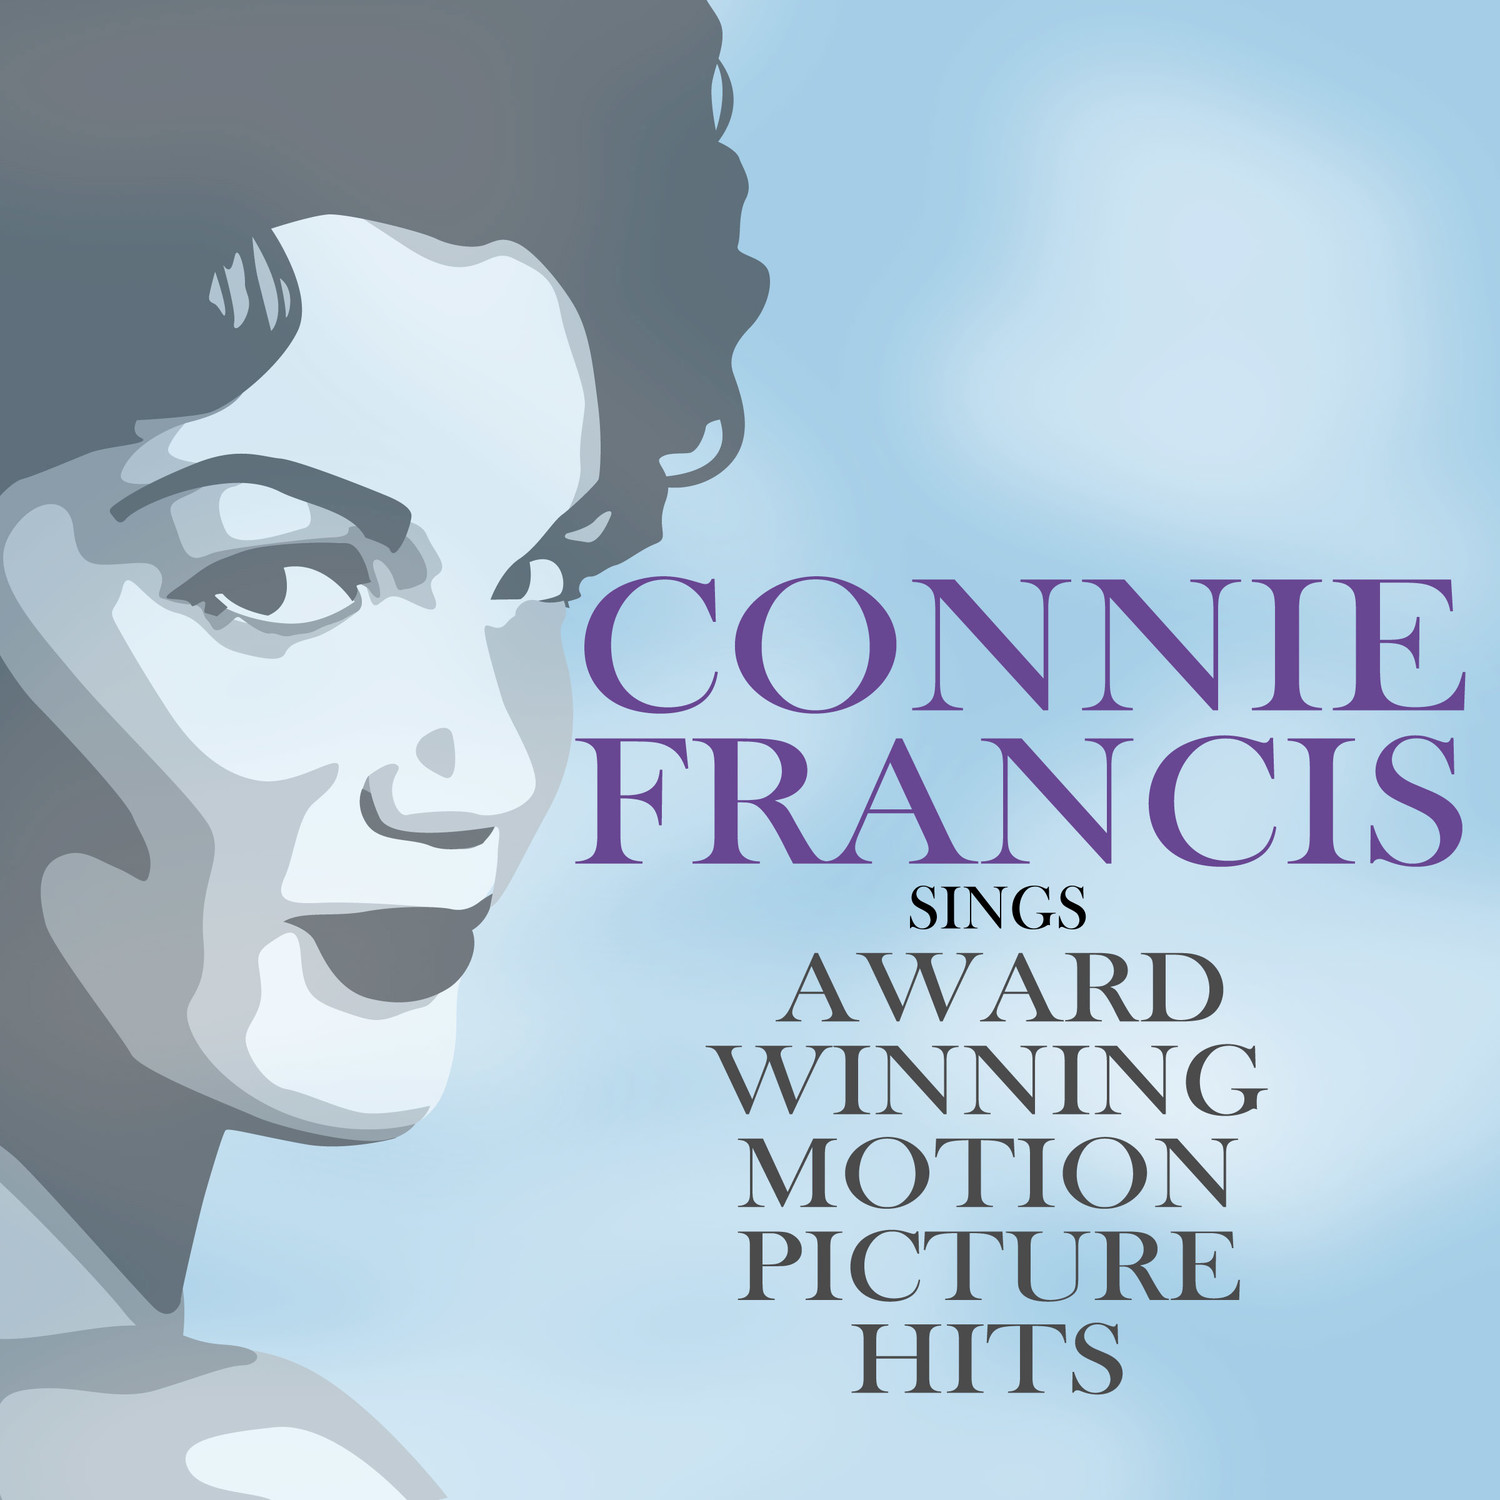 Connie Francis Sings Award Winning Motion Picture Hits